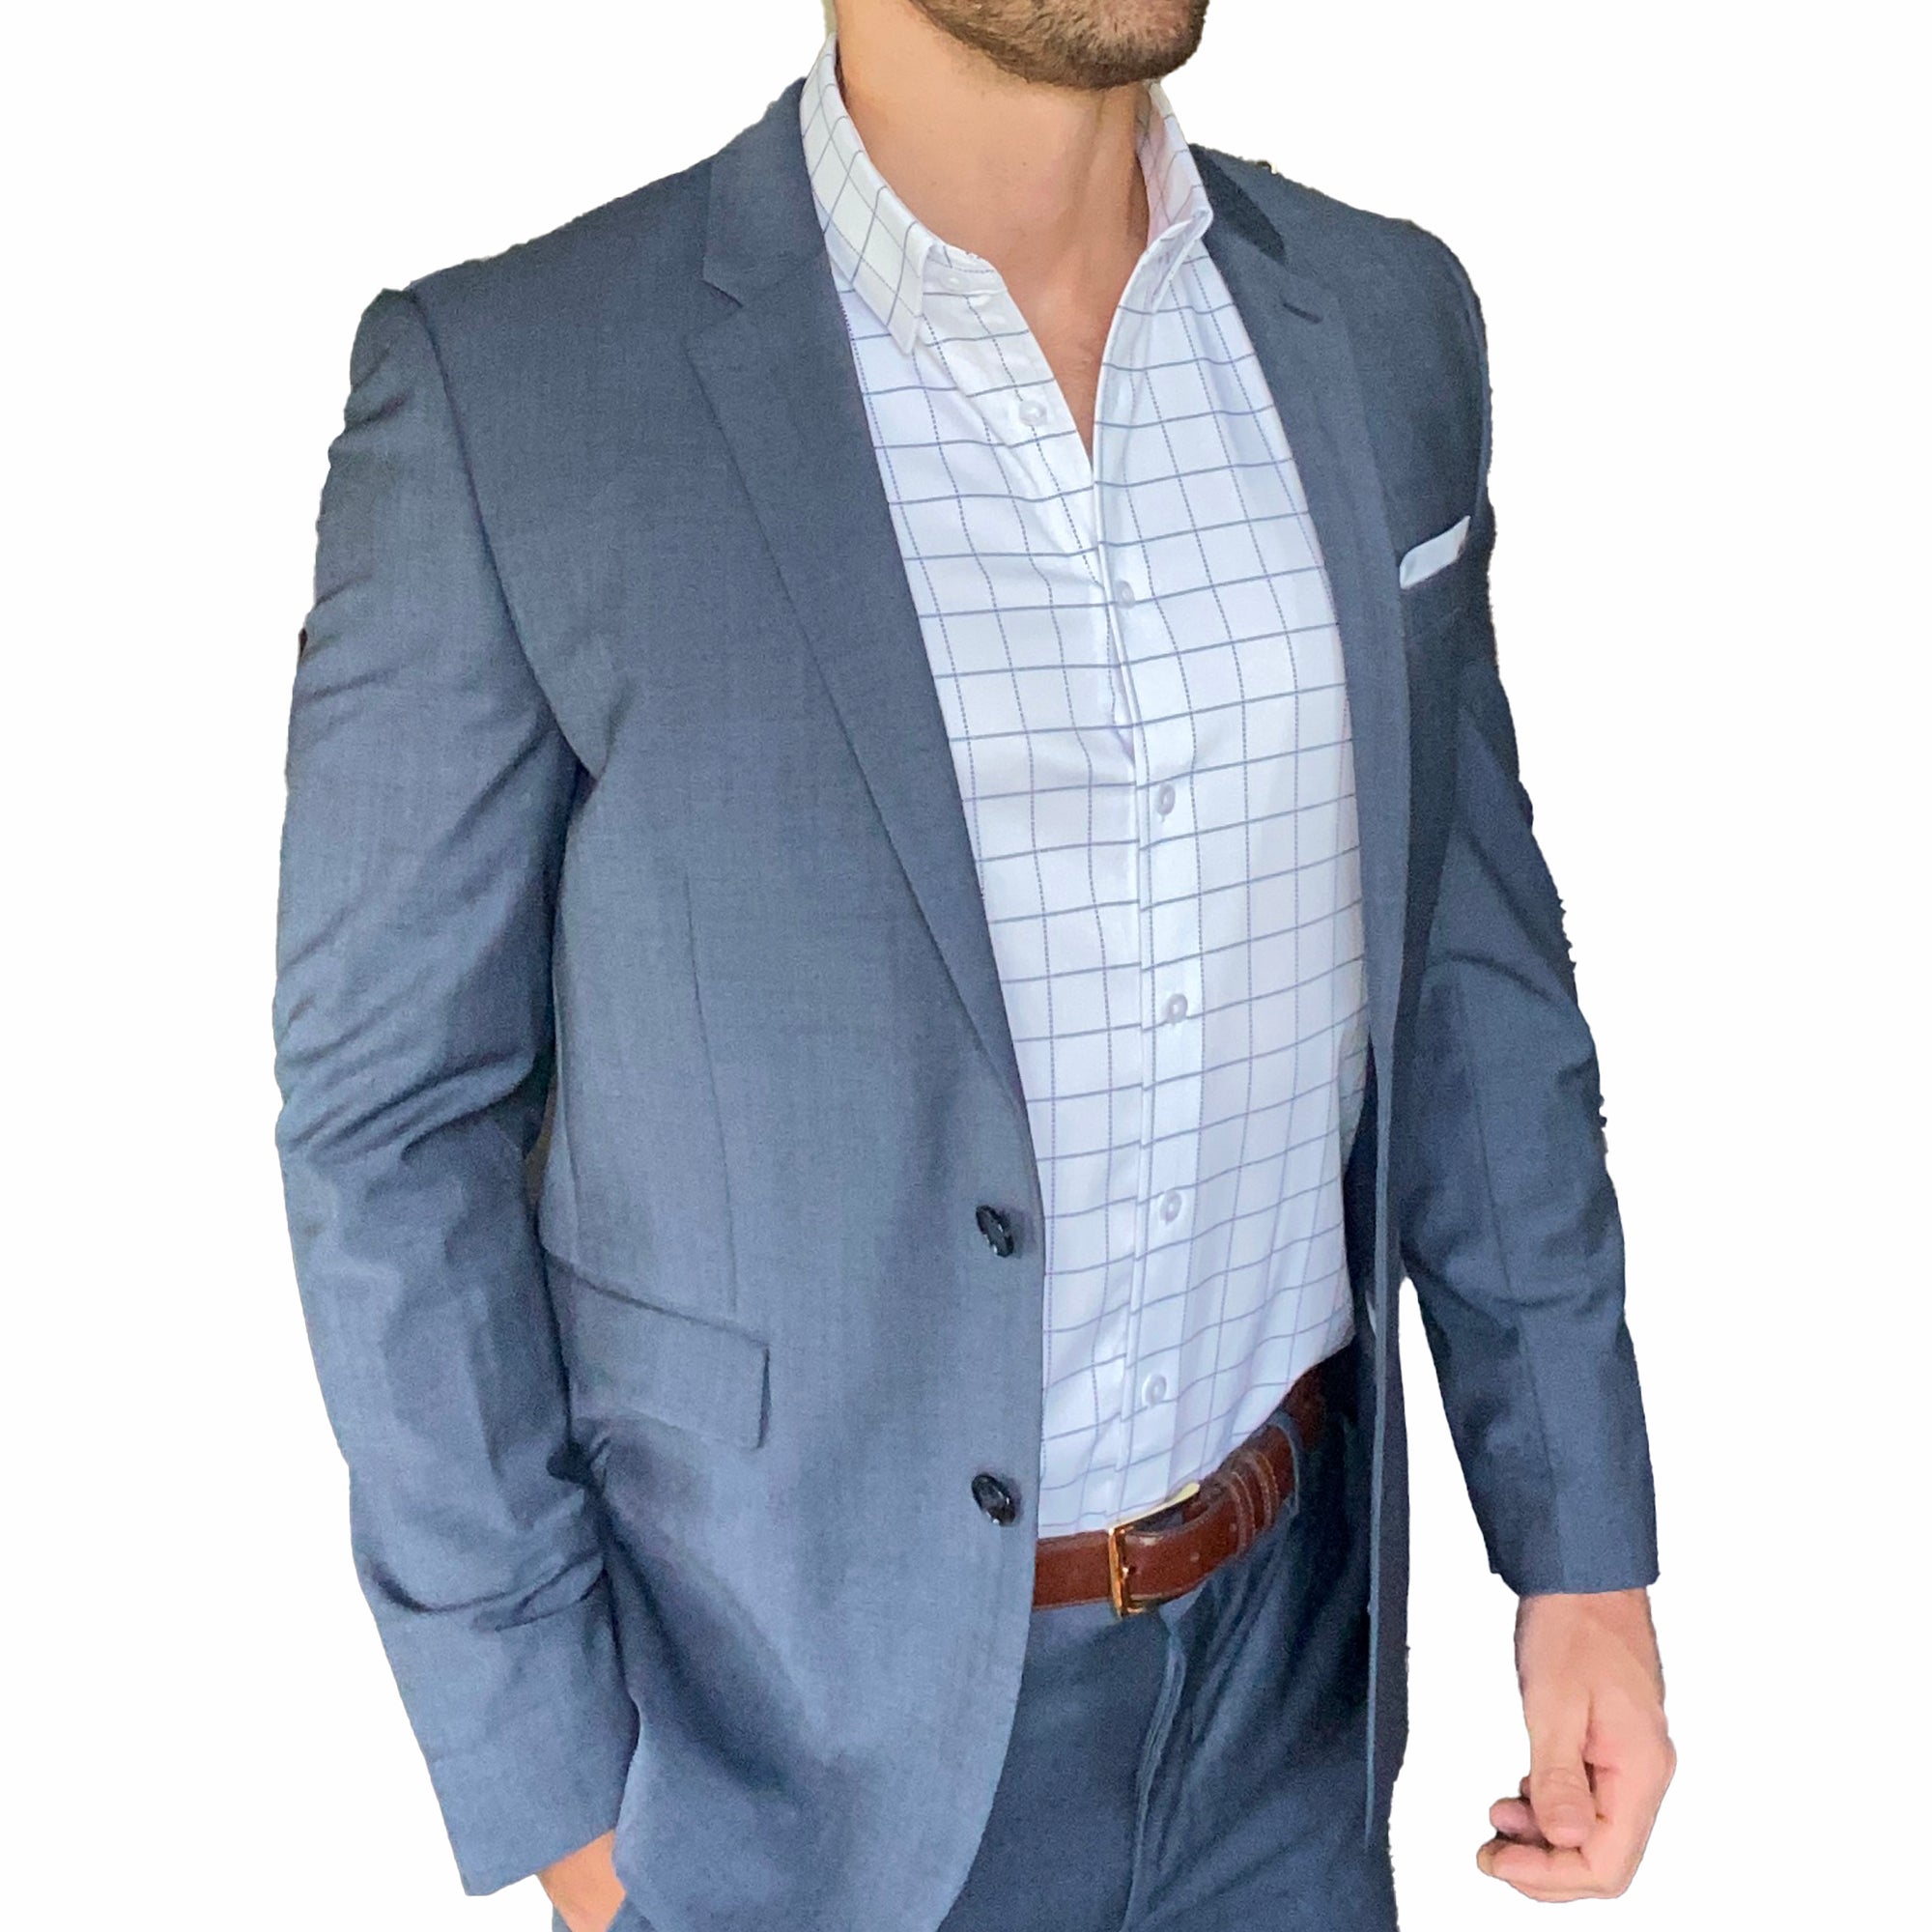 goTIELESS Elevates Dress Shirt Game with Patented Million Dollar Collar Technology